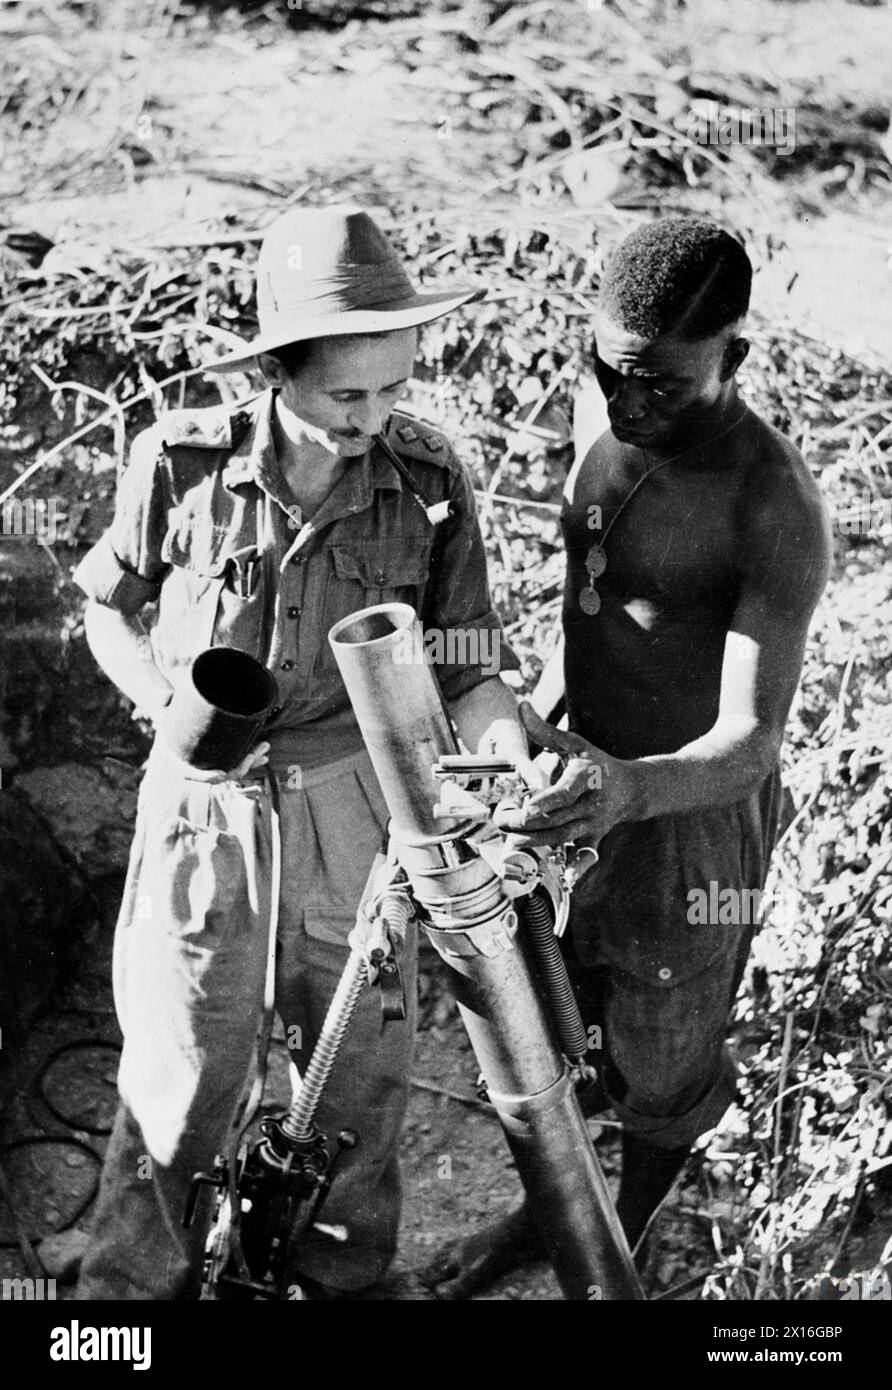 POLISH OFFICERS IN THE ROYAL WEST AFRICAN FRONTIER FORCE - Lieutenant Wiesław Bulkowski (or Bułkowski), Mortar Platoon of the 1st Battalion, the Gambia Regiment (6st West African Infantry Brigade, 81st West African Division) instructing a native soldier on the use of a mortar during the Third Arakan Campaign, January 1945.He was a Polish cavalry officer seconded to the RWAFF Polish Army, Royal West African Frontier Force, Royal West African Frontier Force, 81st West African Division, Royal West African Frontier Force, 81st West African Division, 6th West African Brigade, Gambia Regiment, 1st B Stock Photo